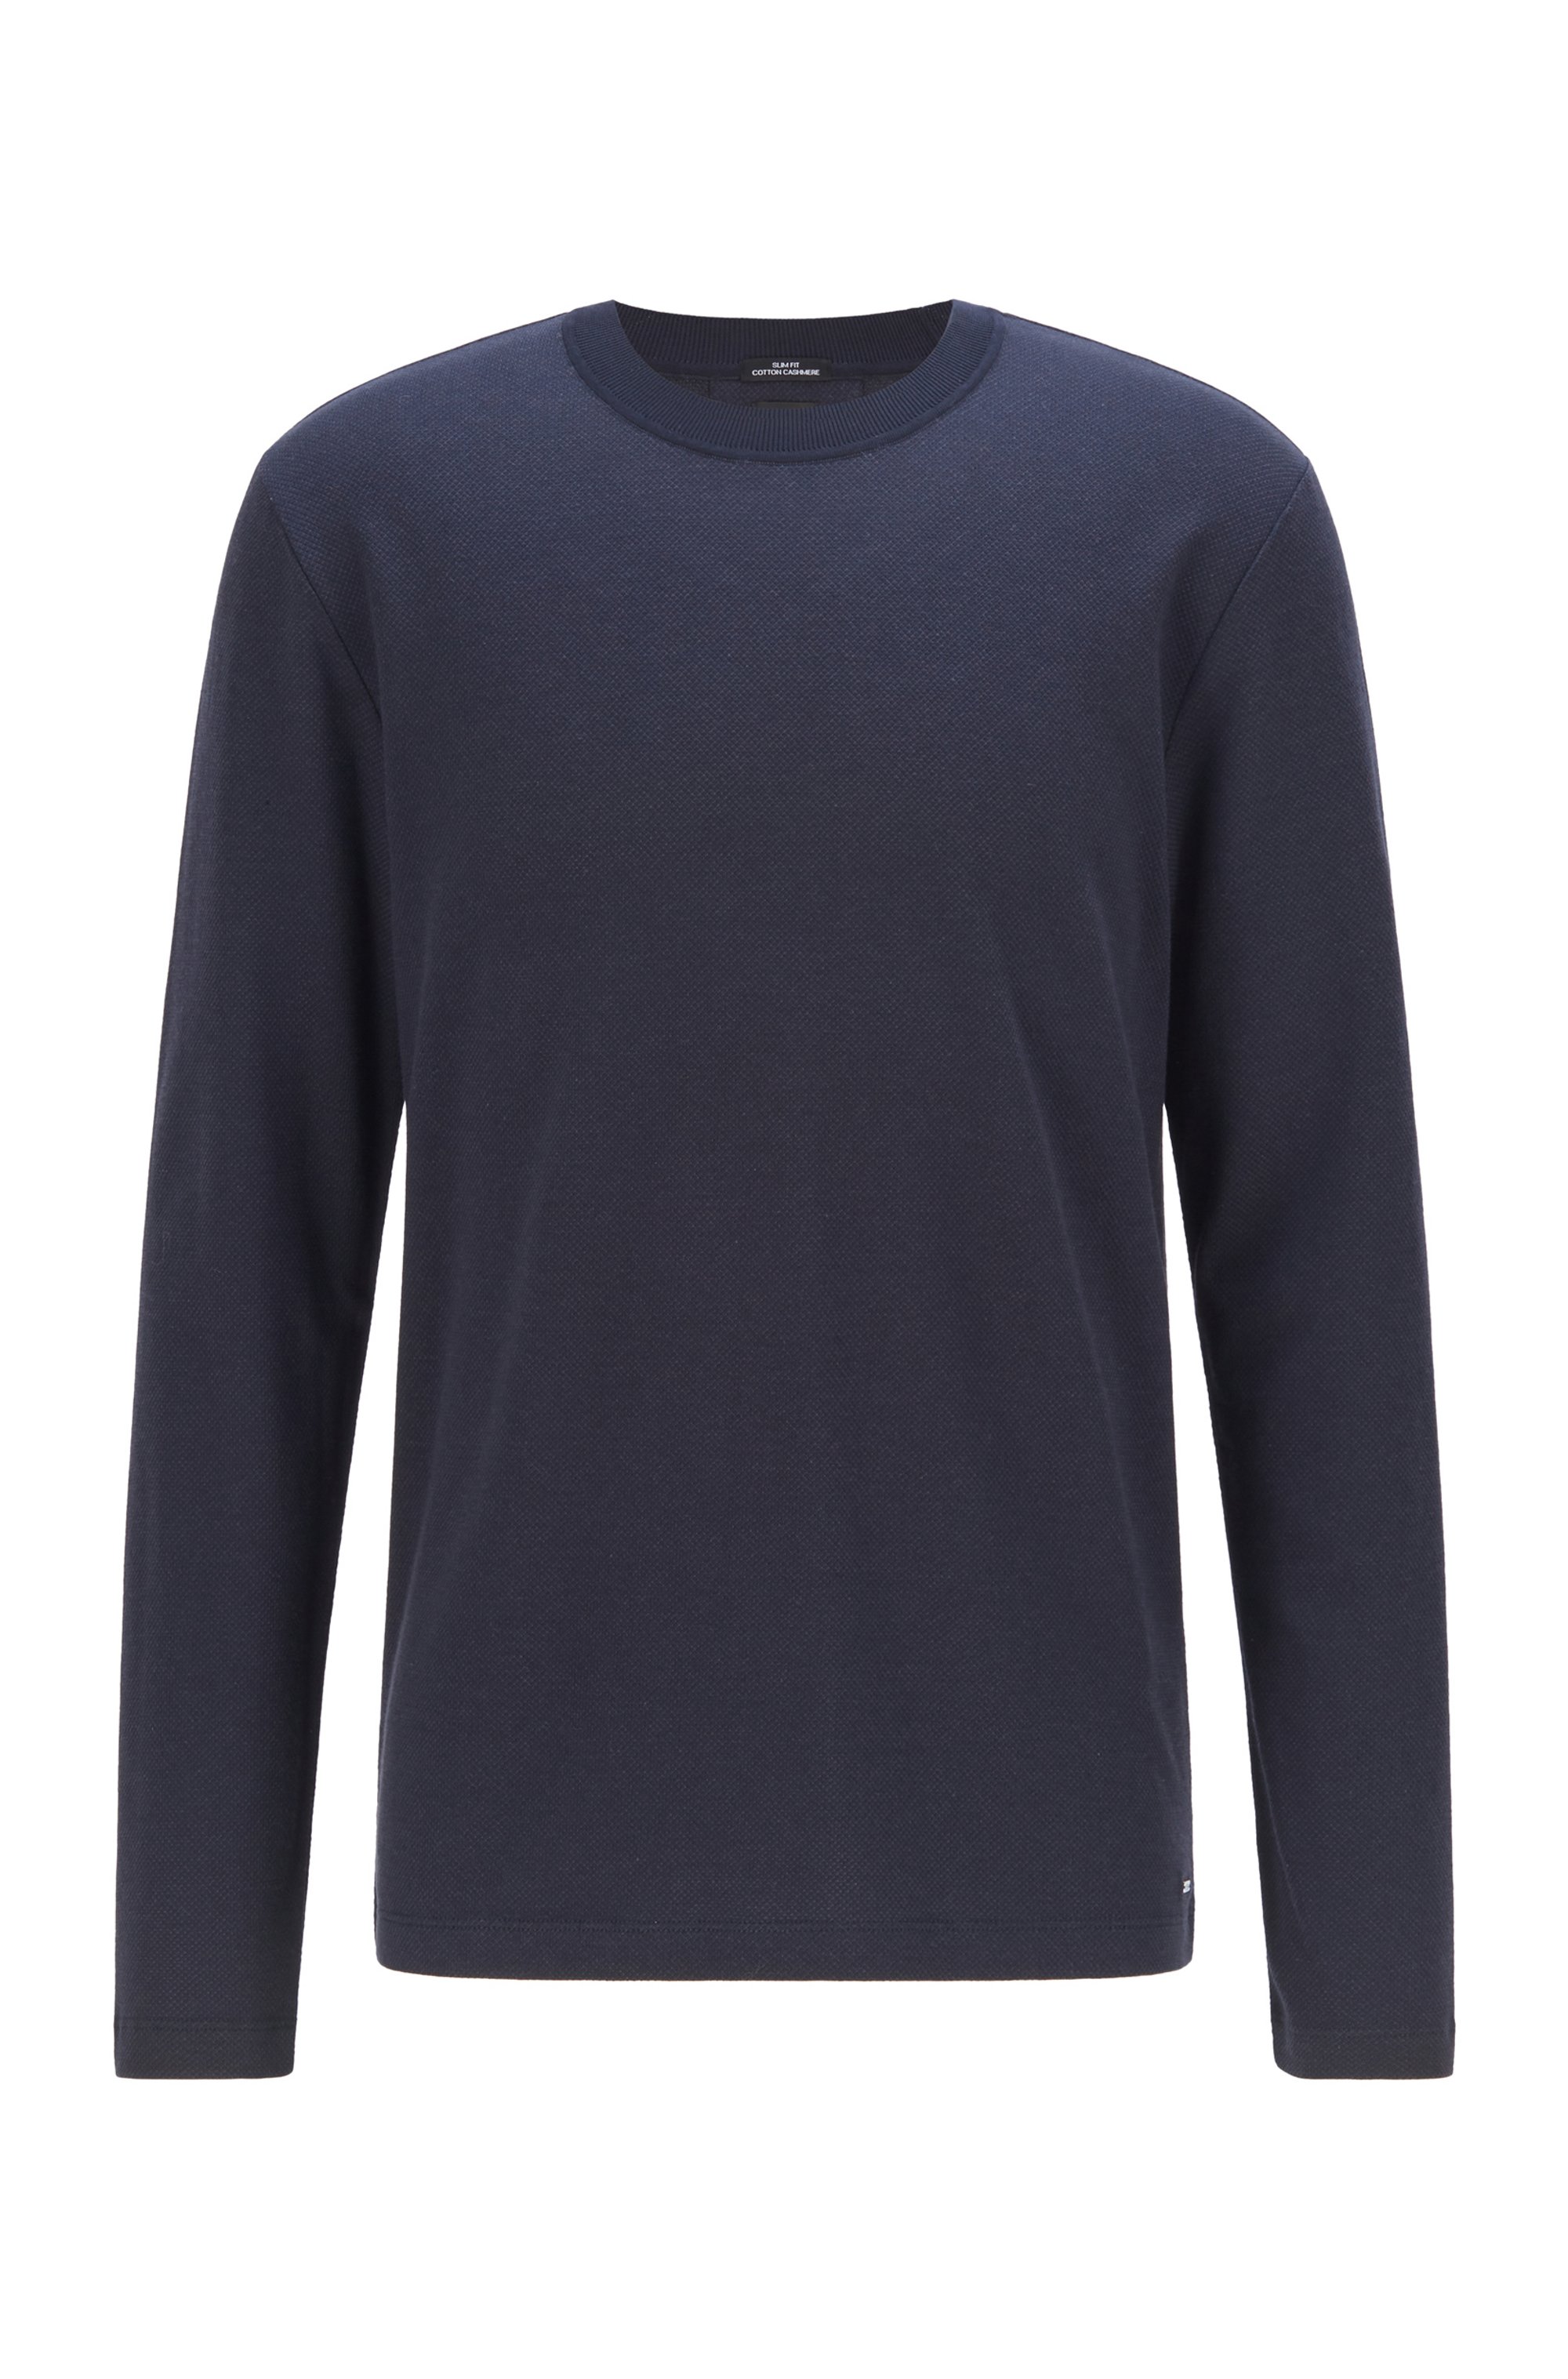 Slim-fit long-sleeved T-shirt in cotton and cashmere, Dark Blue